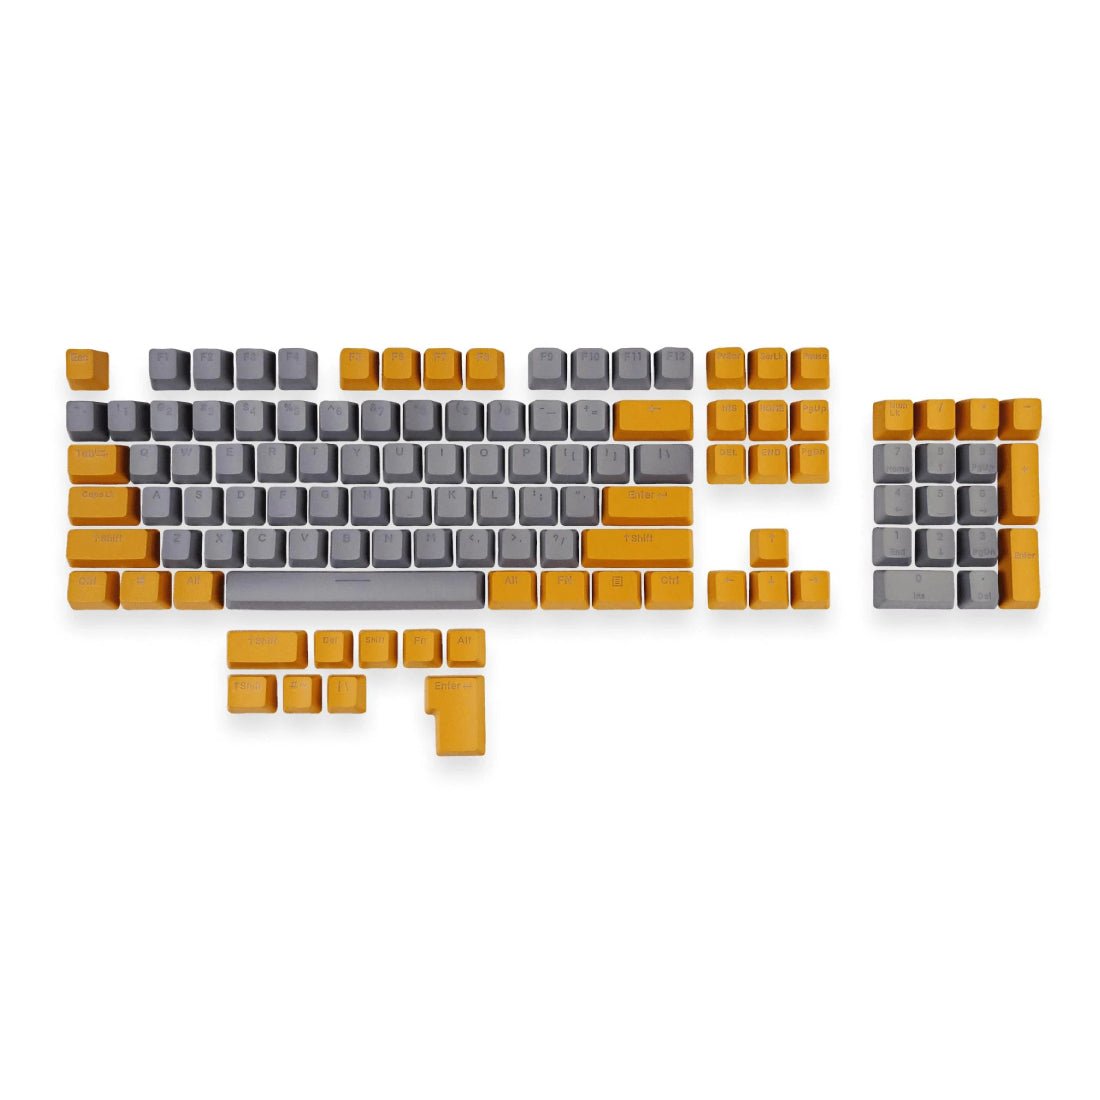 Mountain Mineral PBT Keycap set - Wulfenite A - Store 974 | ستور ٩٧٤